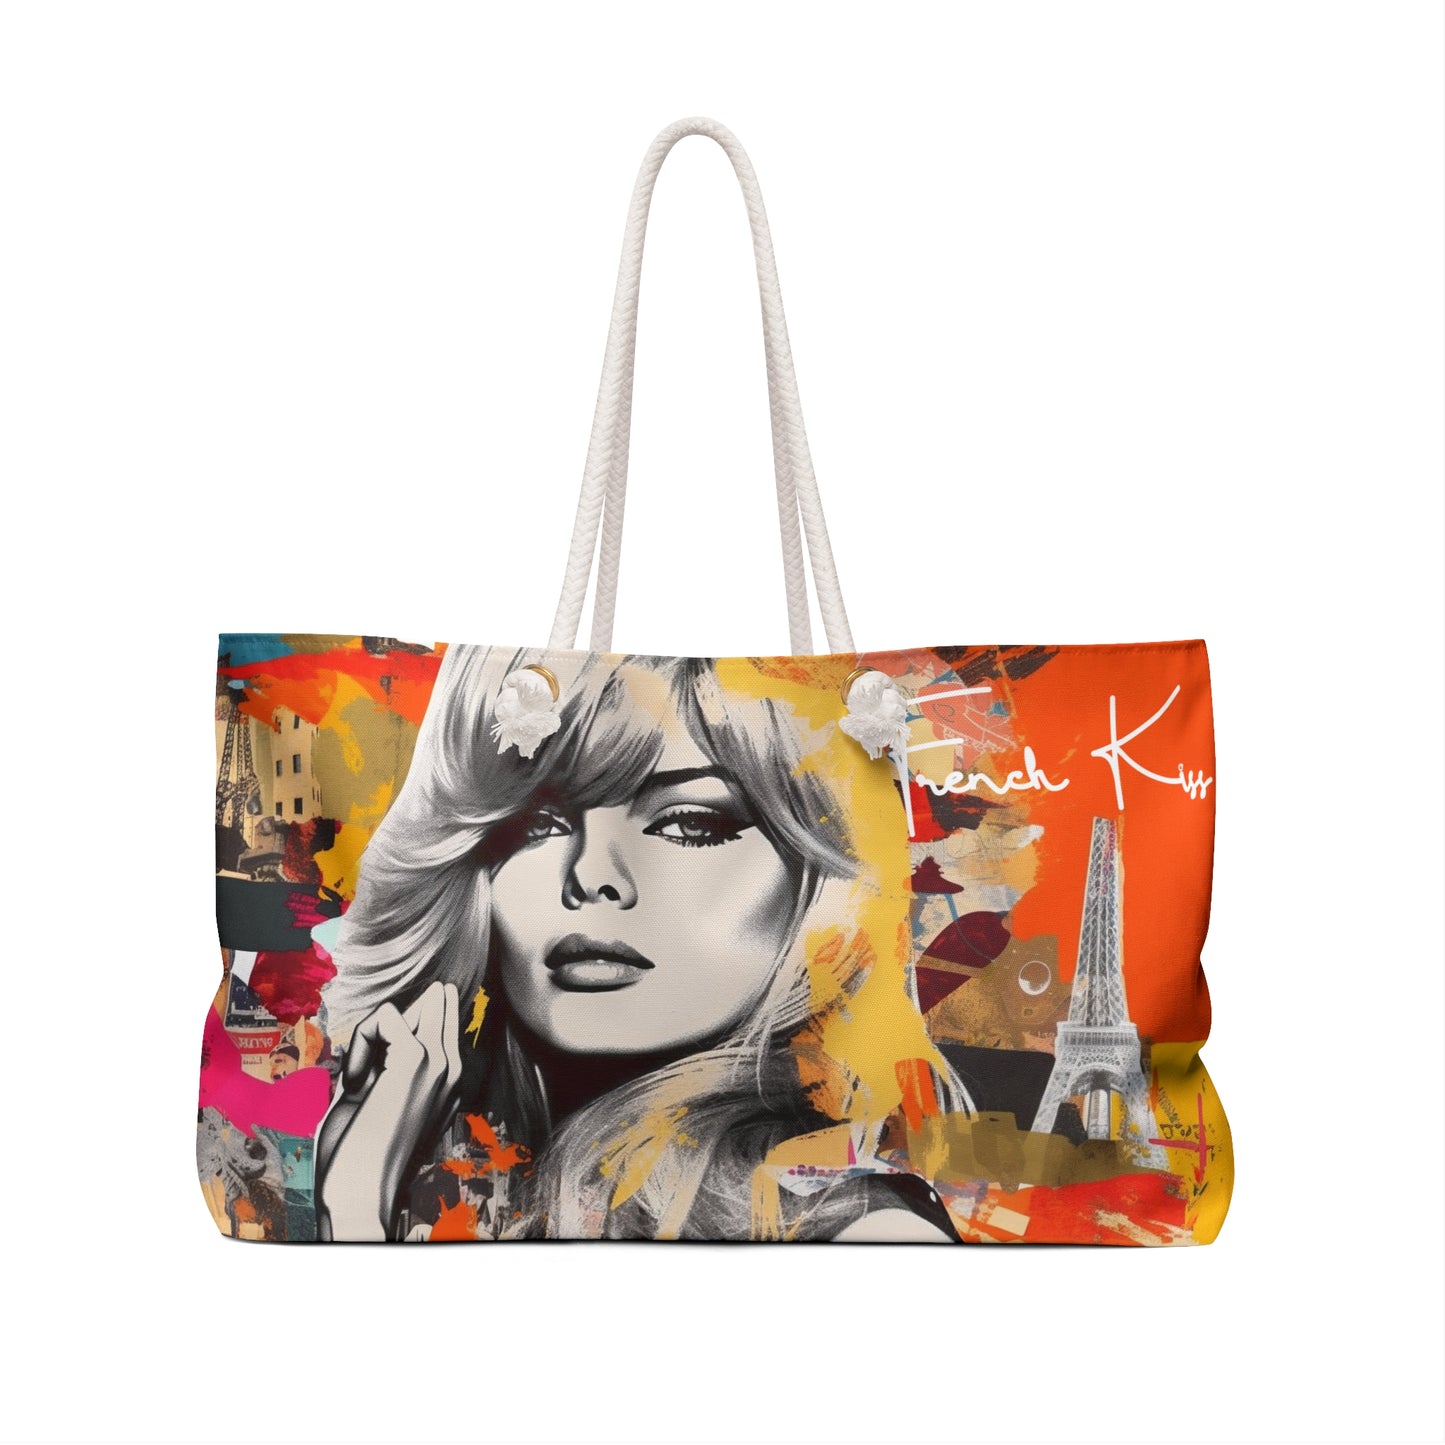 TOUJOURS PARIS Sassy Sexy Chic Weekender Accessory Bag French Kiss Pop Art, Classy, Couture, Travel, Fashion, Beauty gift item